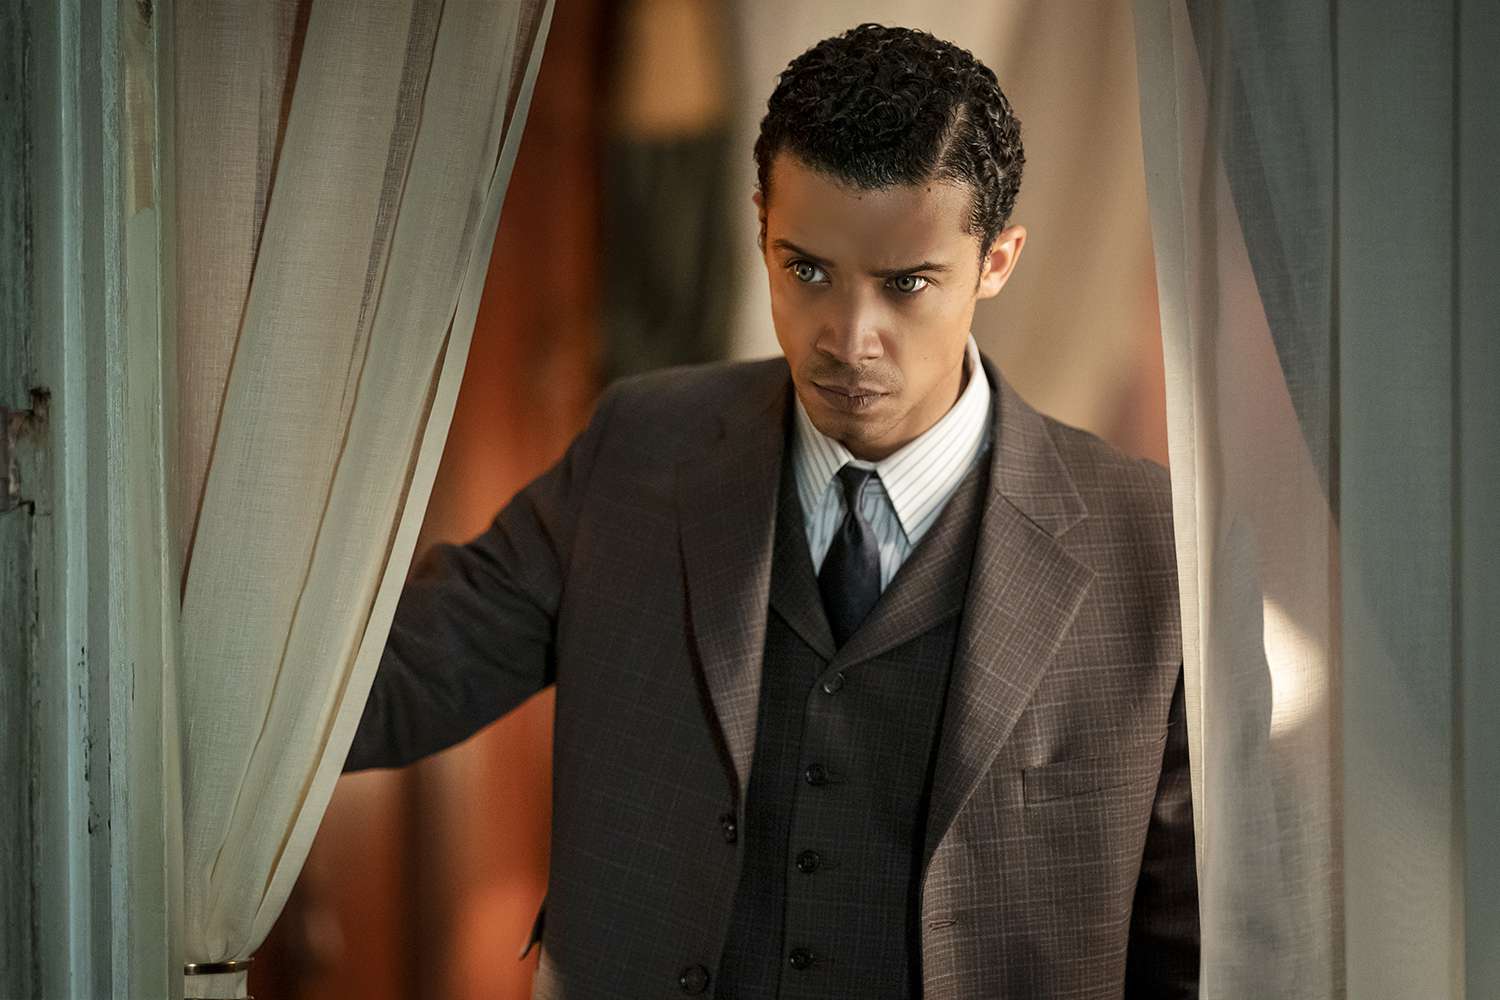 Interview with the Vampire's Jacob Anderson on 'Emotional' Season 2: 'People Are Going to Scream at the TV' (Exclusive)